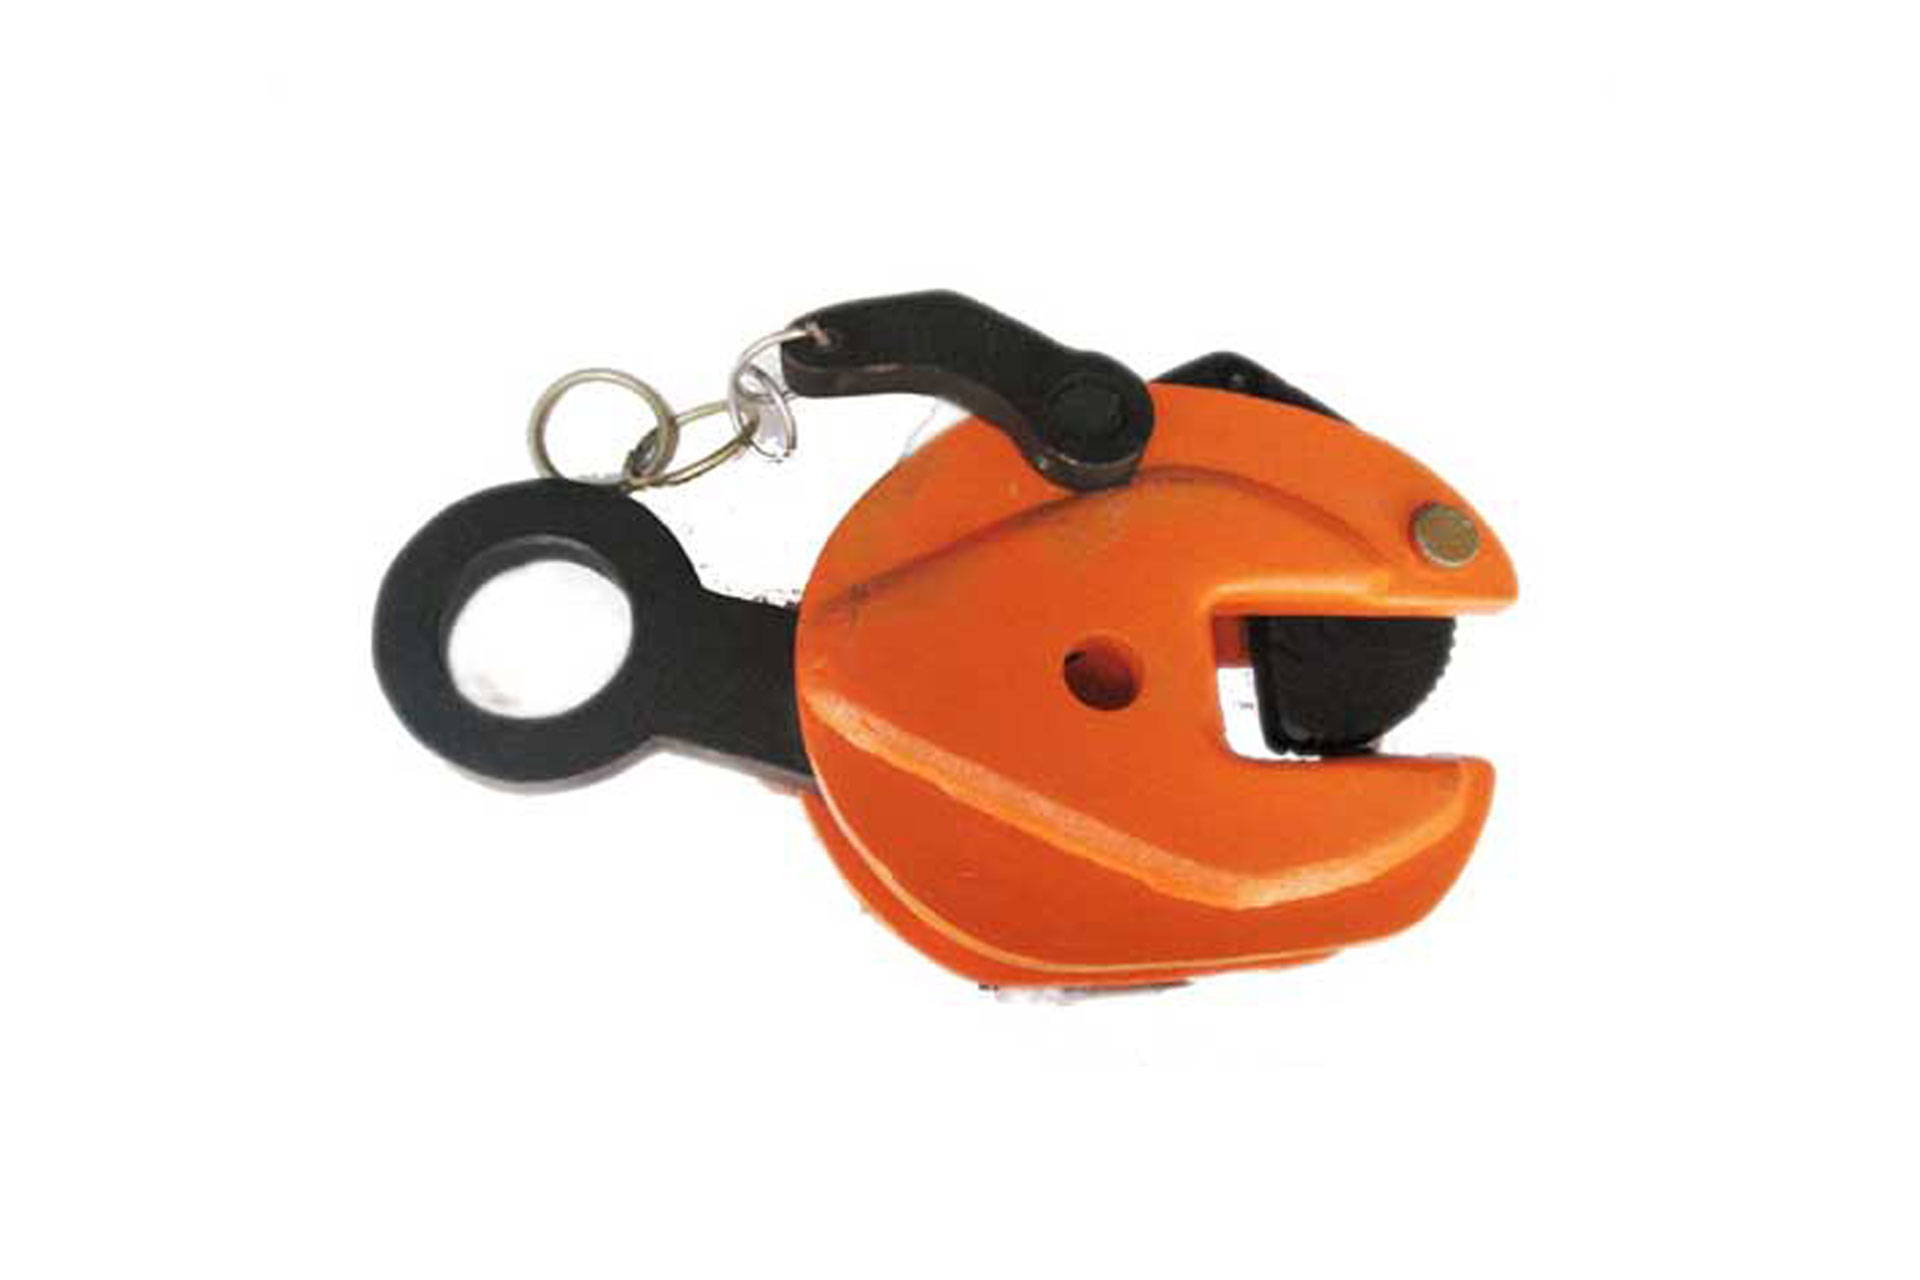 Vertical Plate Lifting Clamp with remote releasing handle